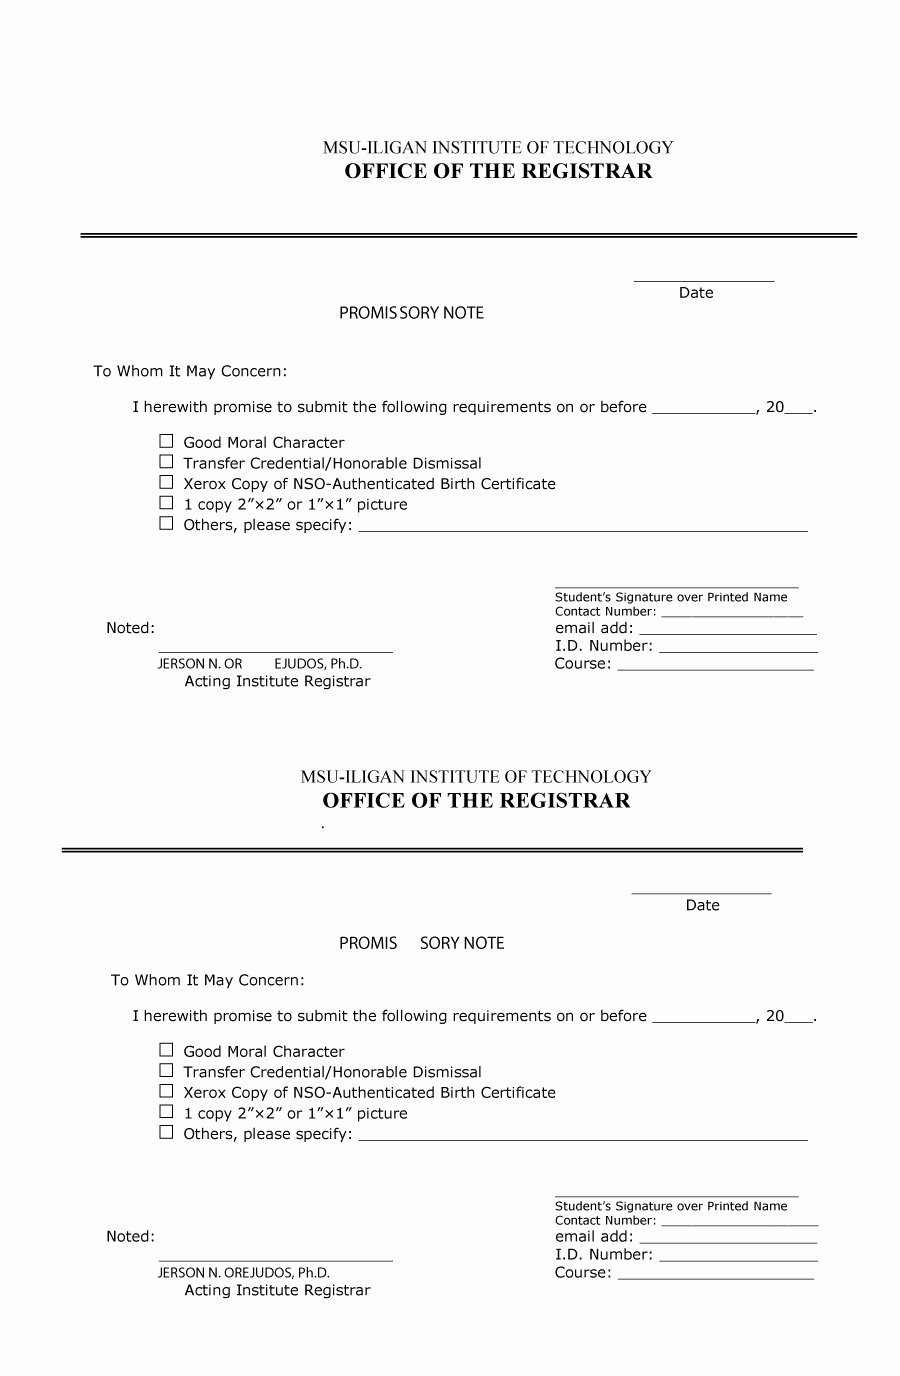 Promissory Note Template Free Unique 45 Free Promissory Note Templates &amp; forms [word &amp; Pdf]